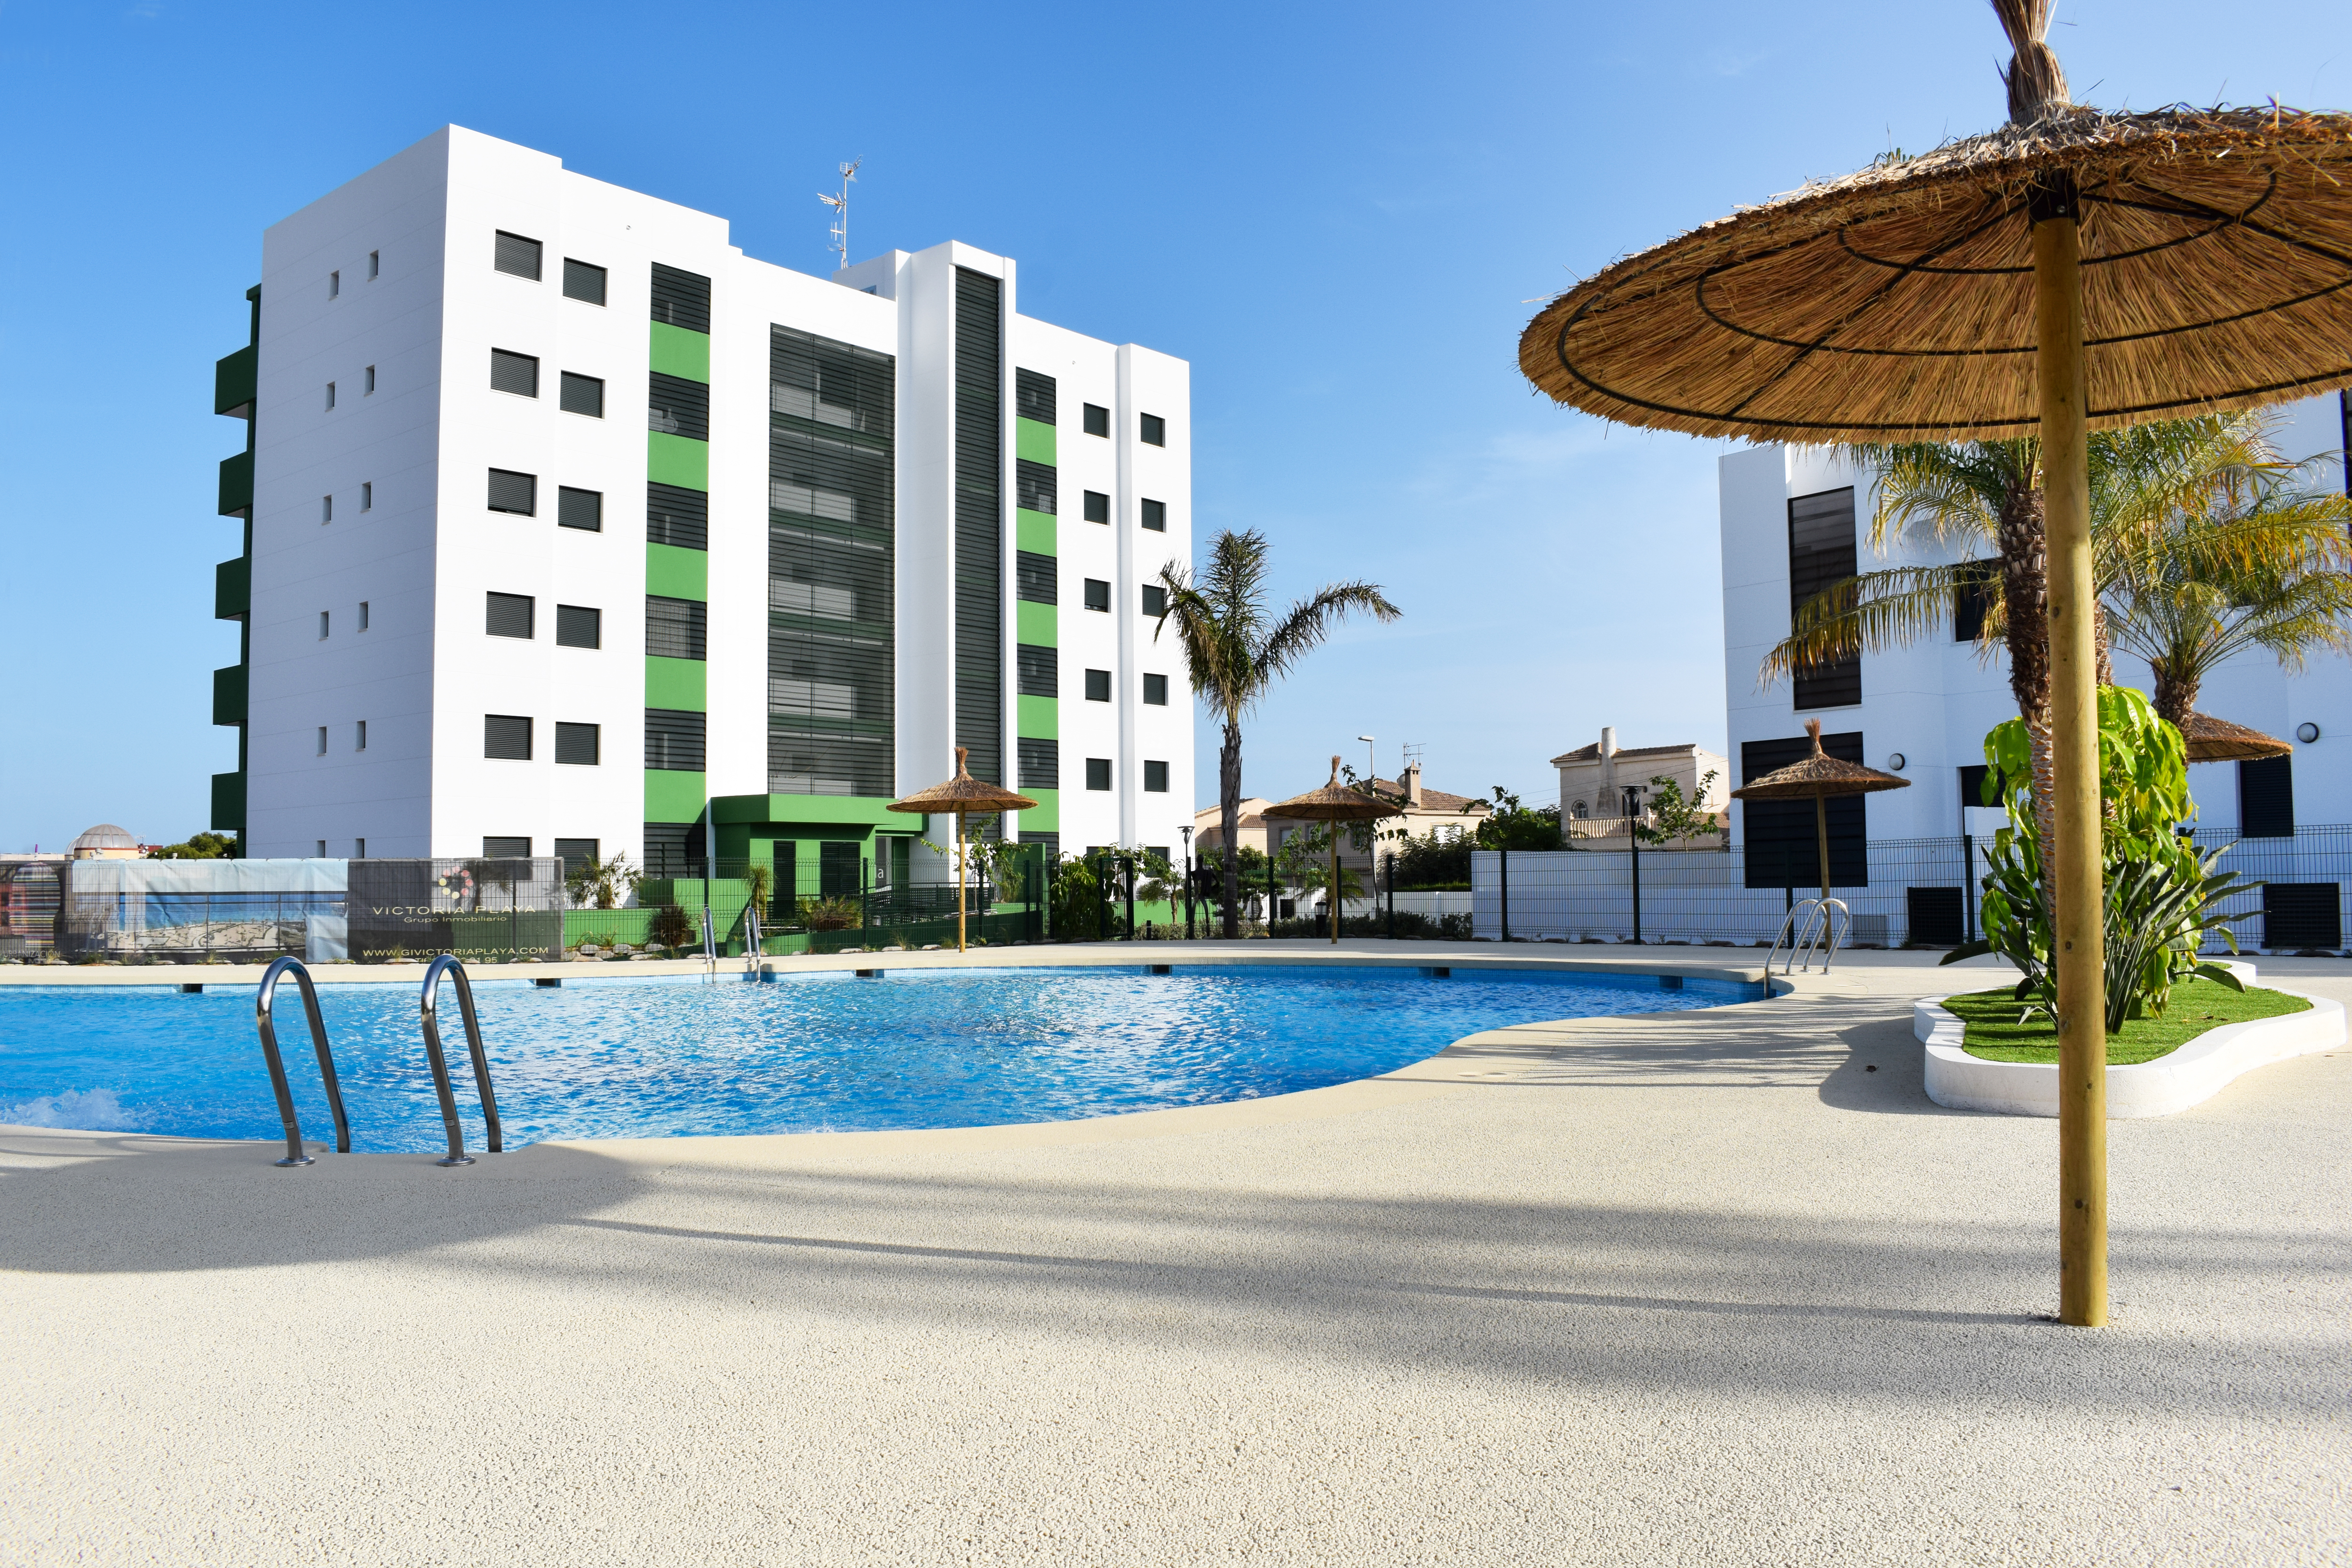 Newly constructed apartments 500m from white sandy beaches